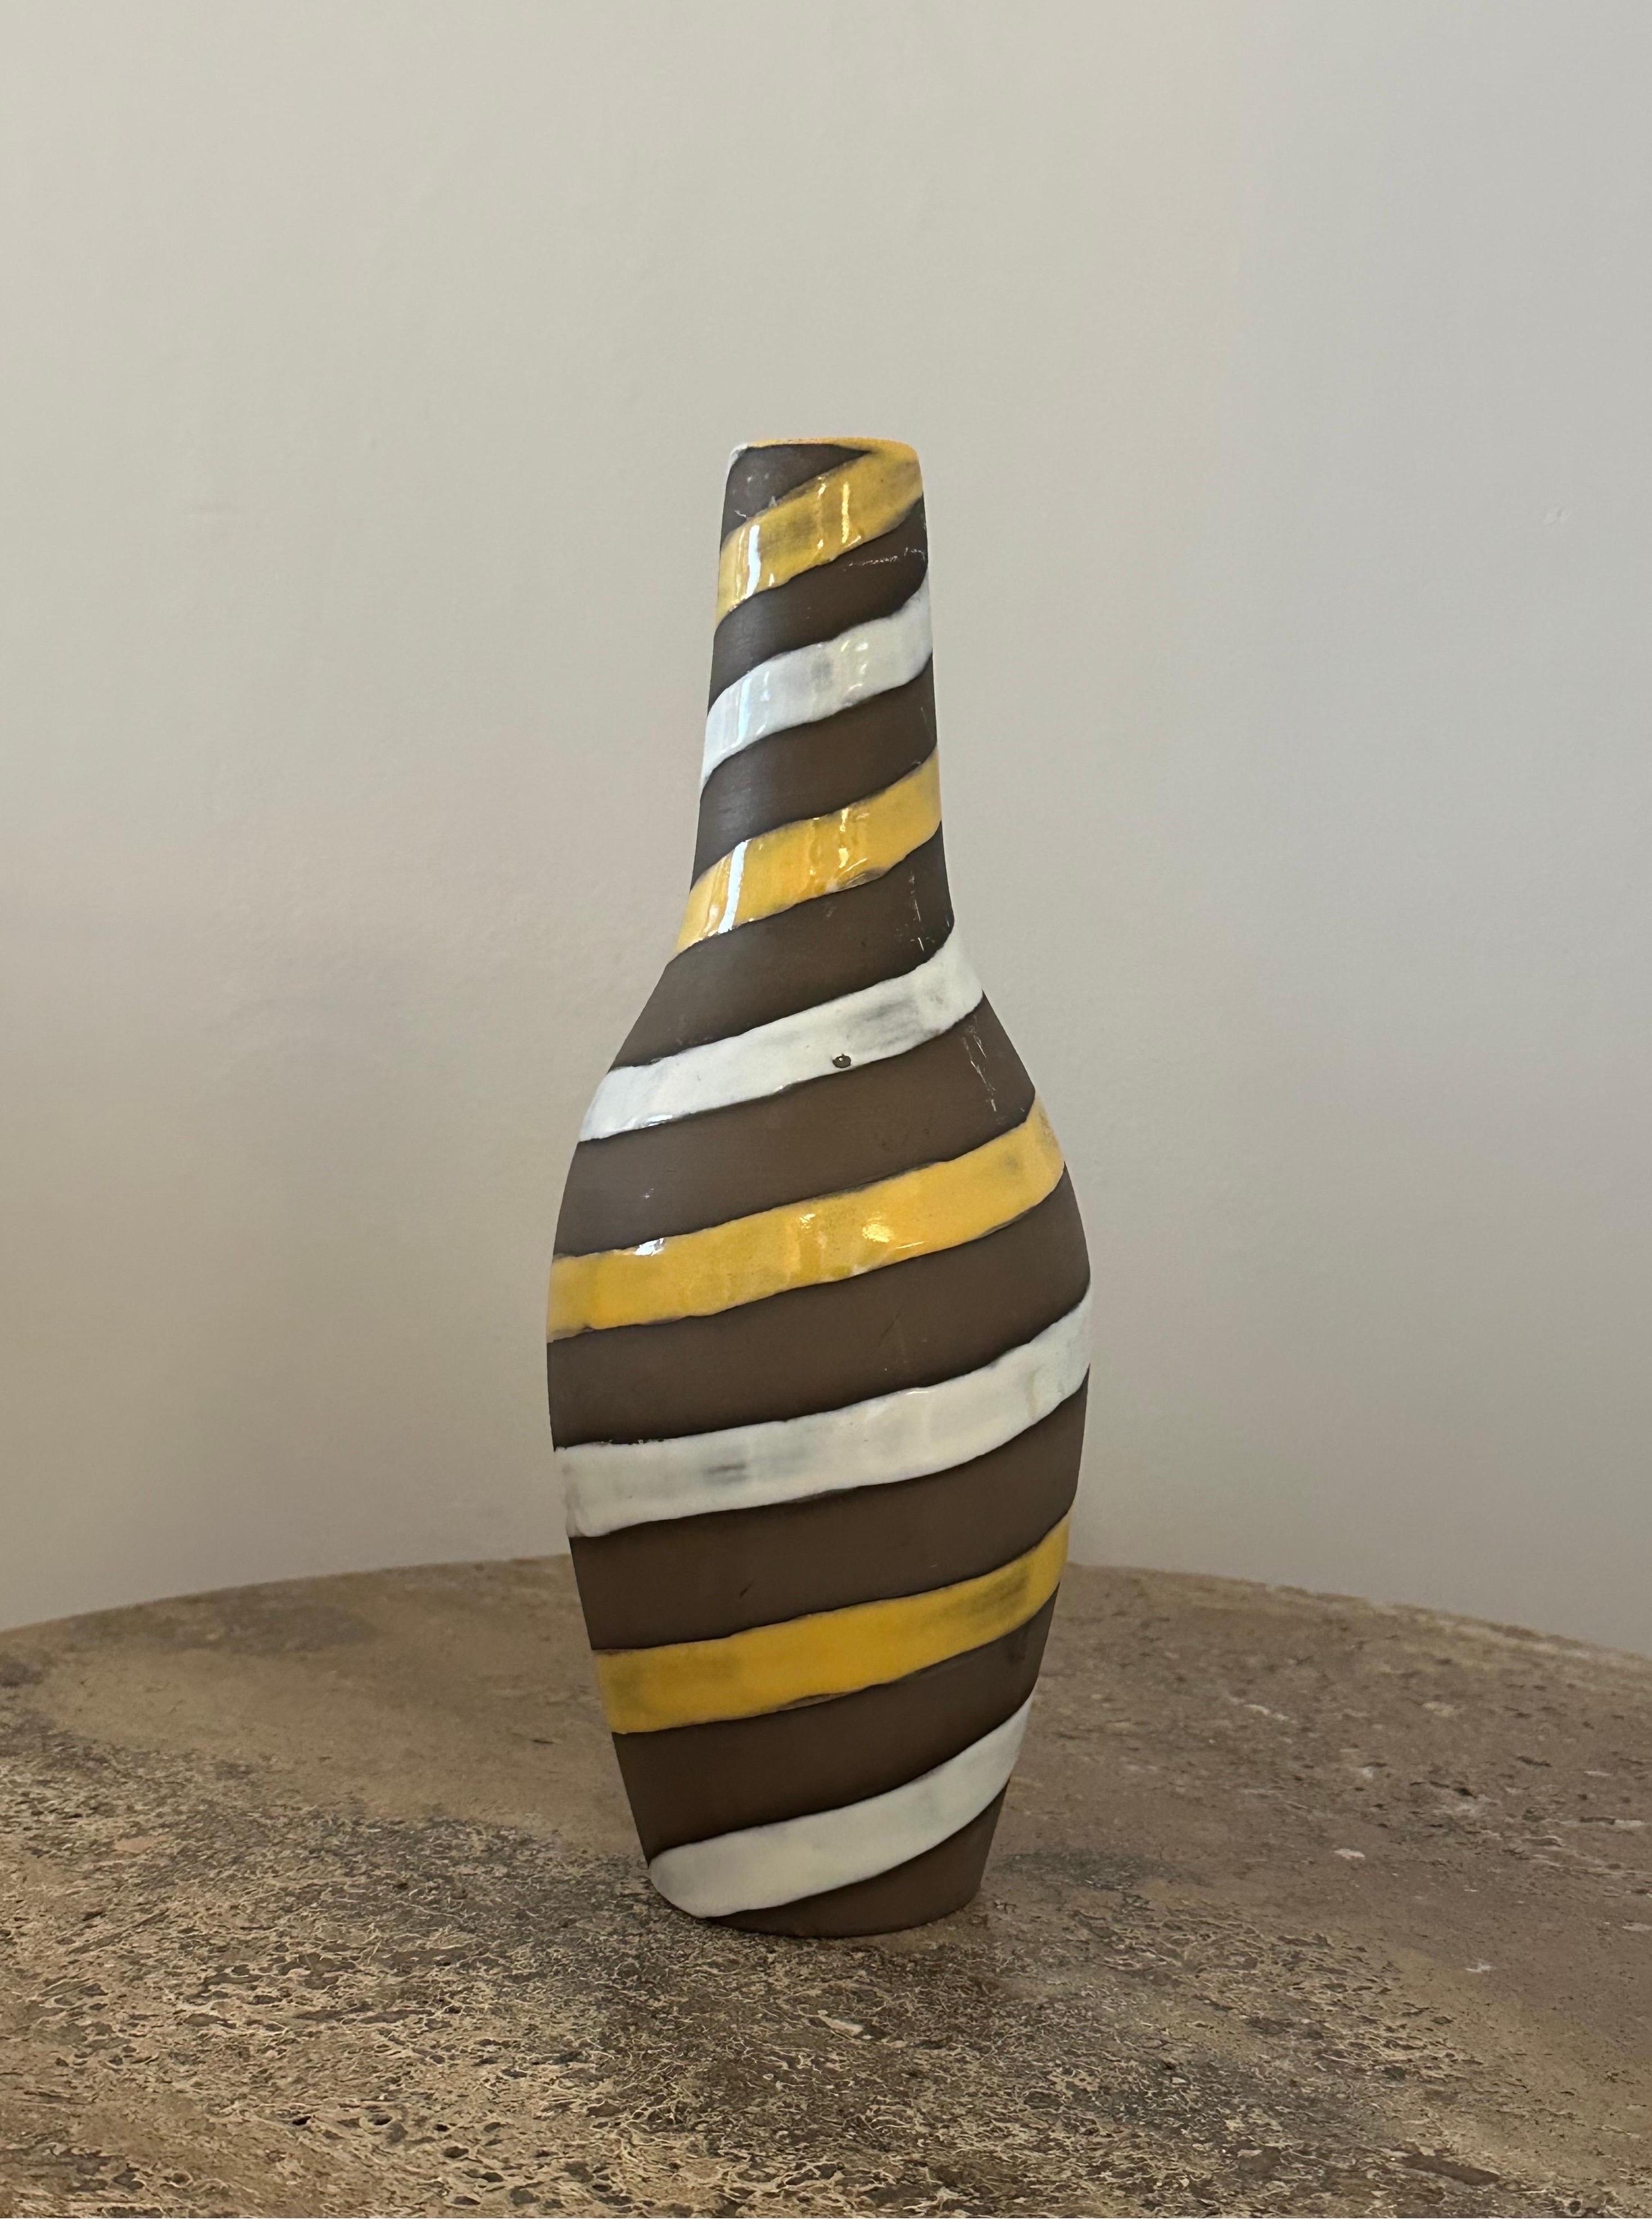 A well proportioned vintage vase designed by Ingrid Atterberg for Upsala-Ekeby. Features a serial pattern of alternating glazes and colors. This is often referred to as the 